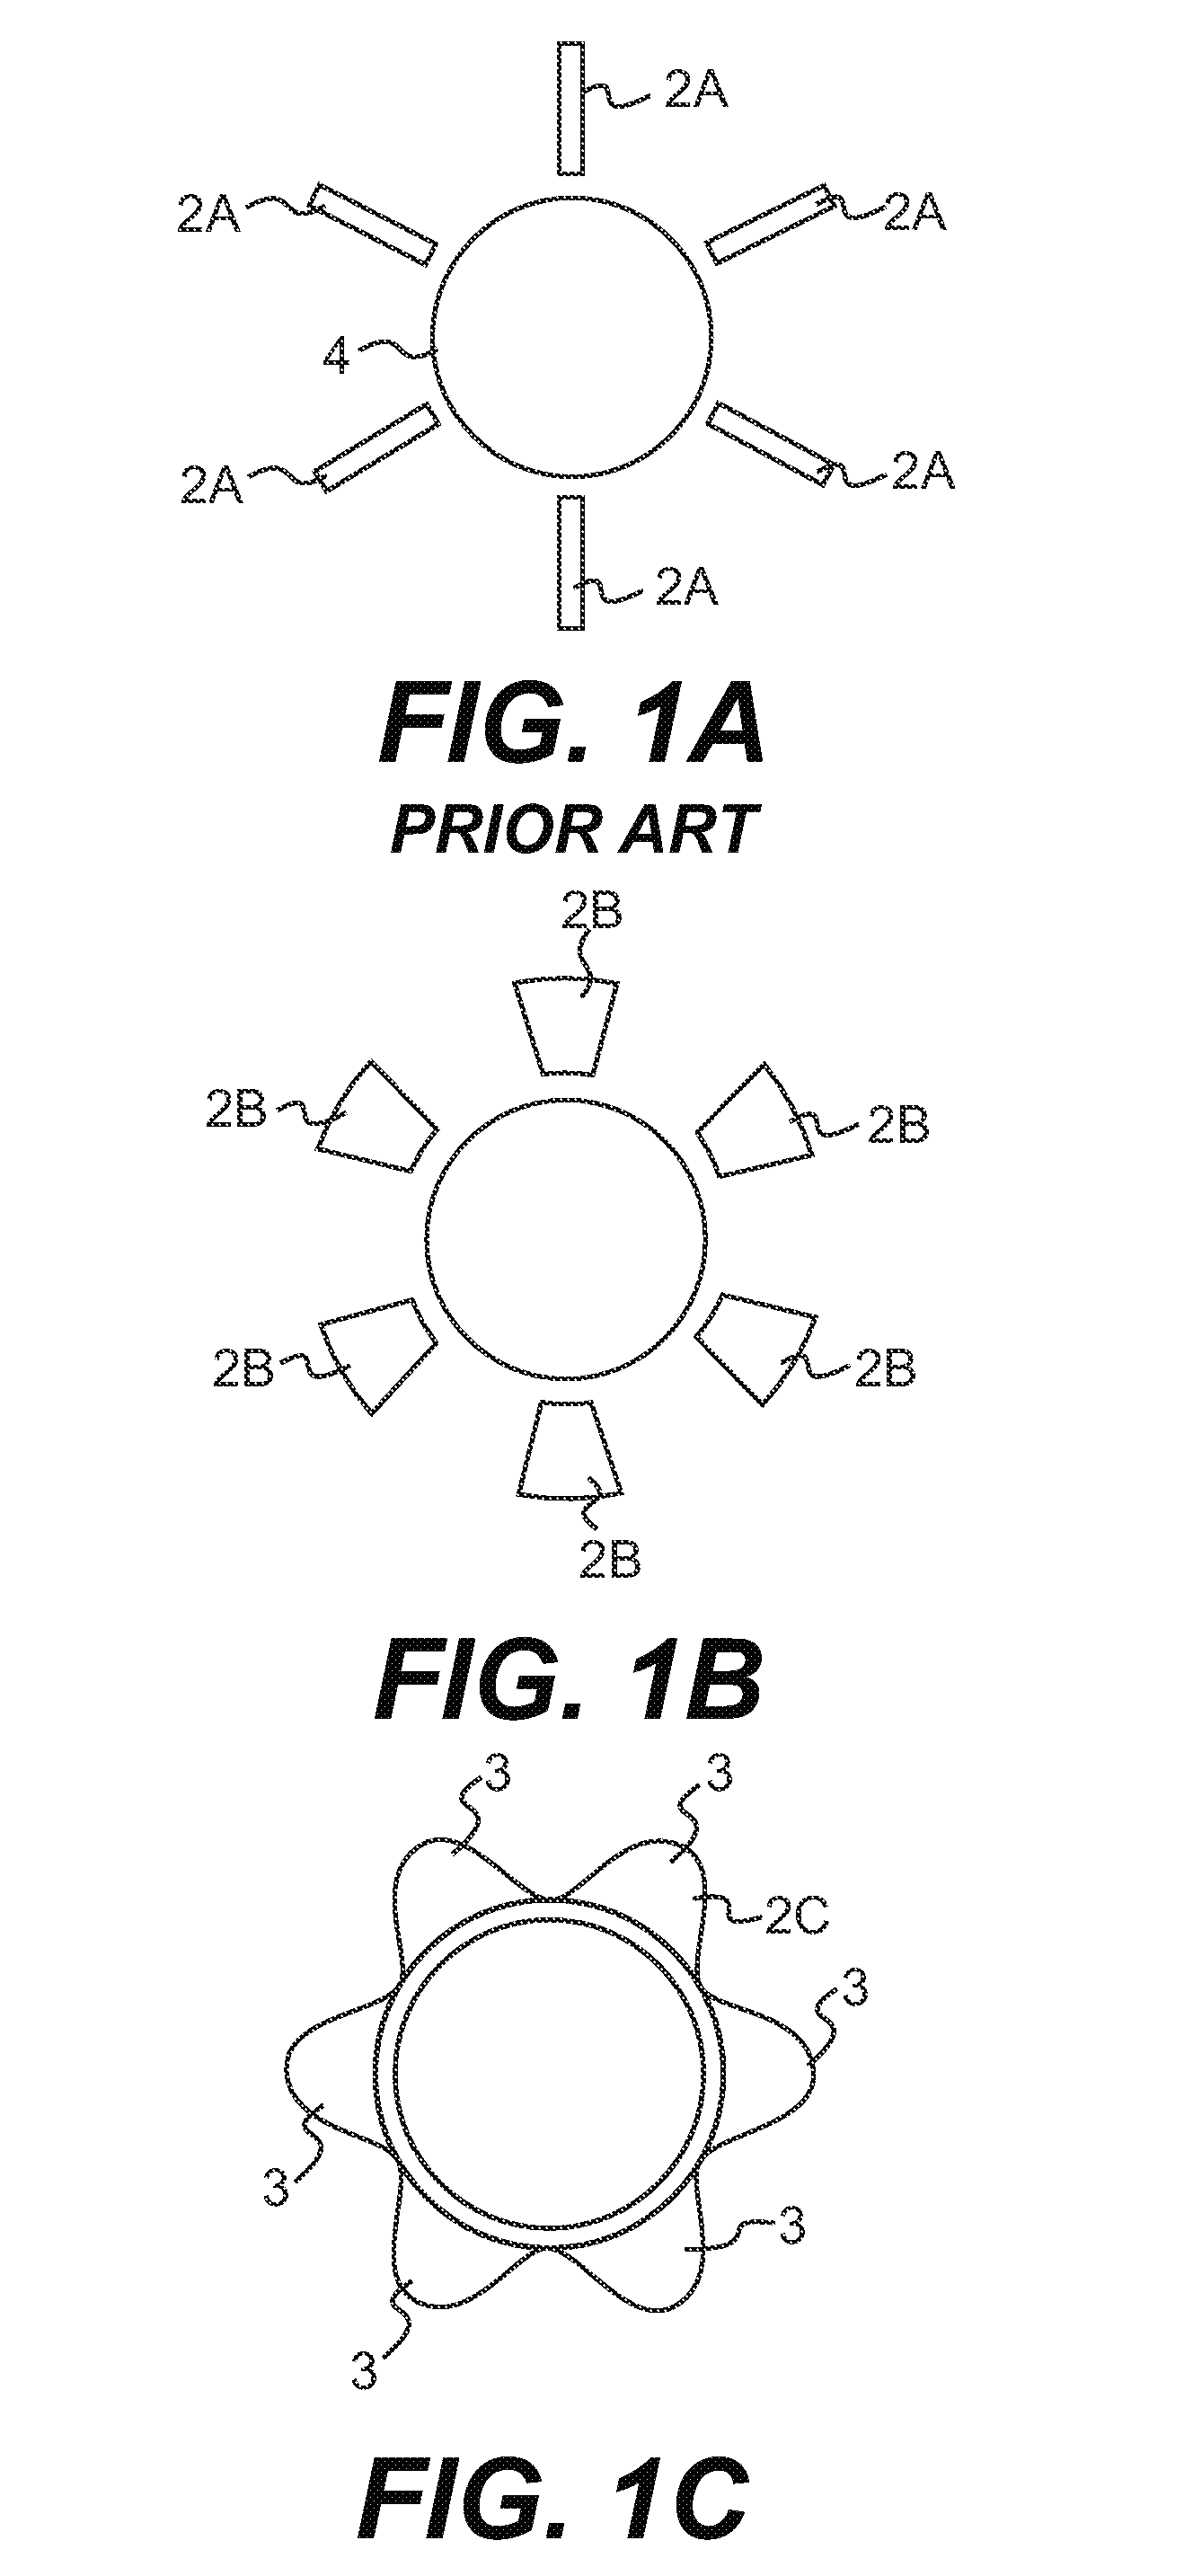 Method and apparatus for controlling tonal noise from subsonic axial fans